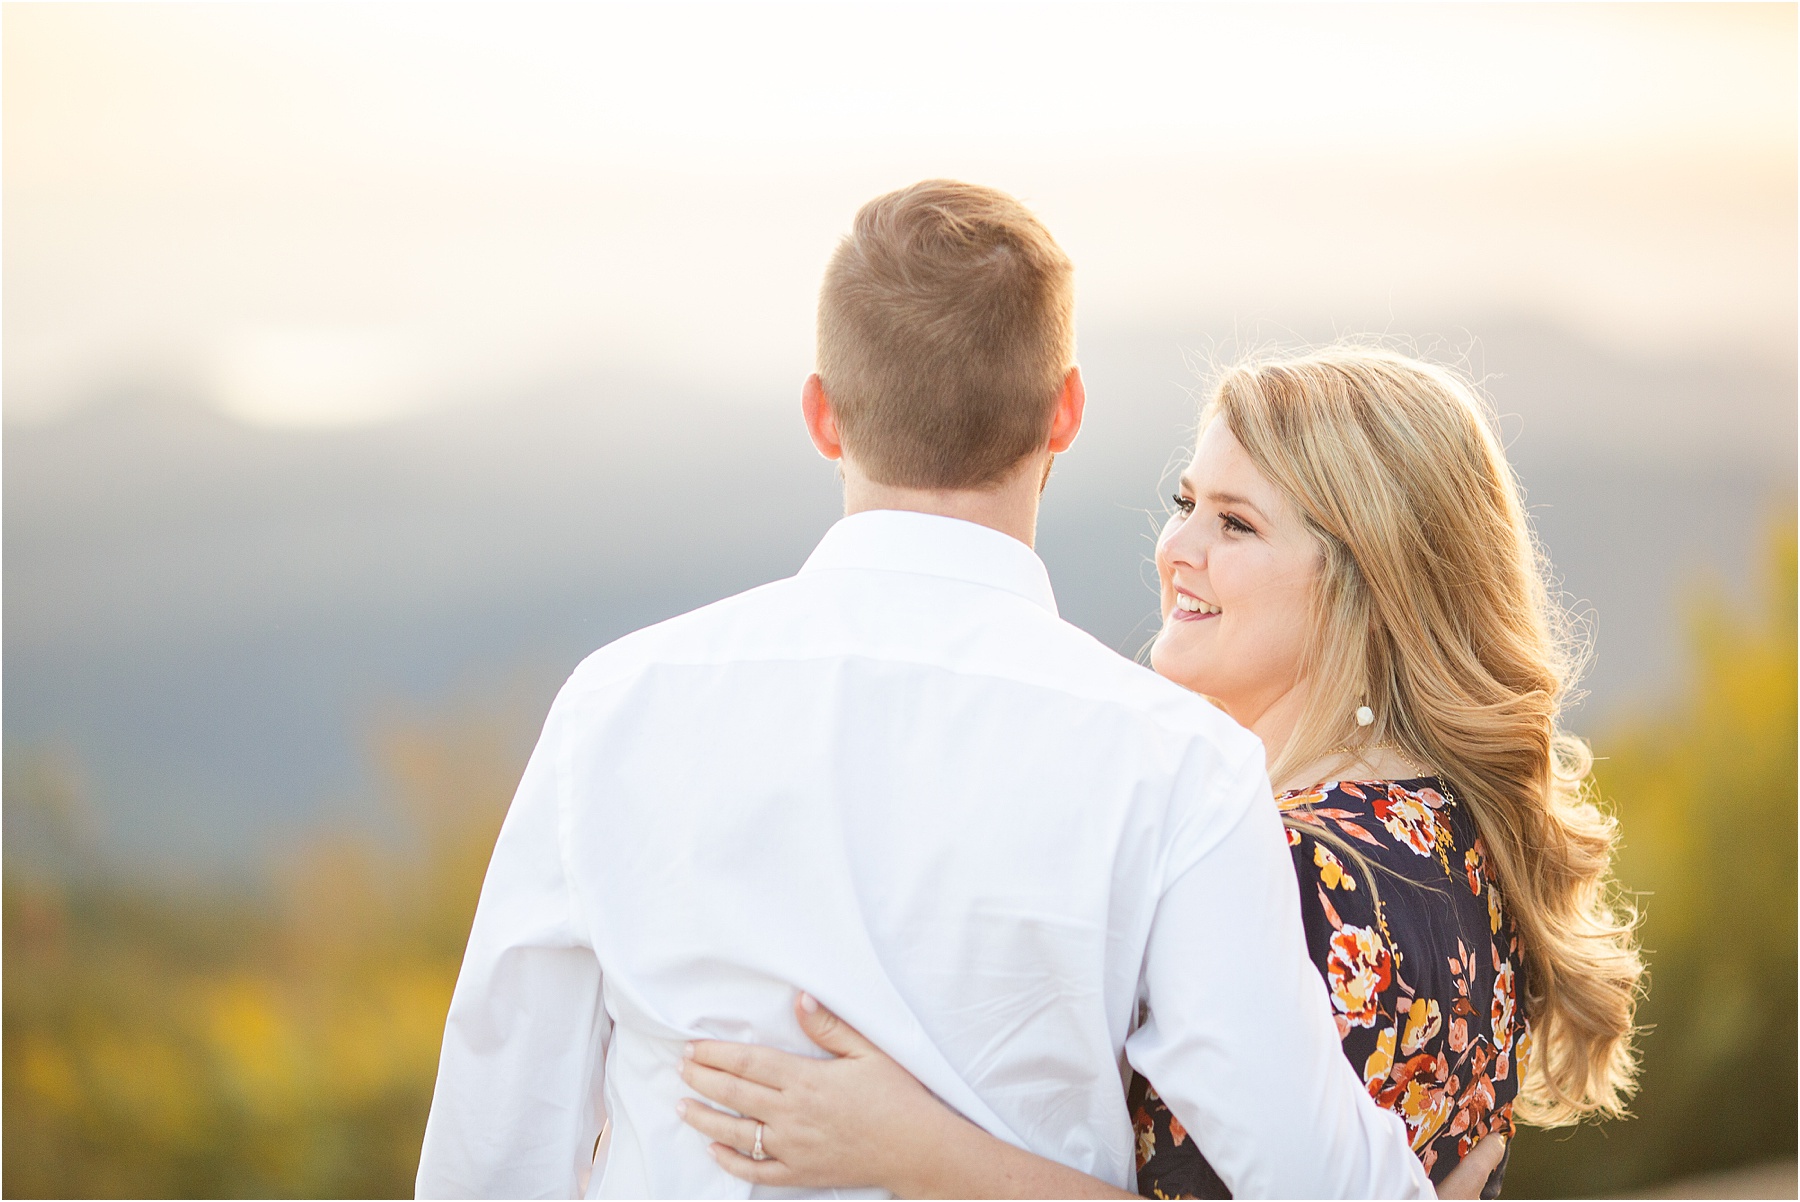 Girl smiling at her fiancé during engagement pictures